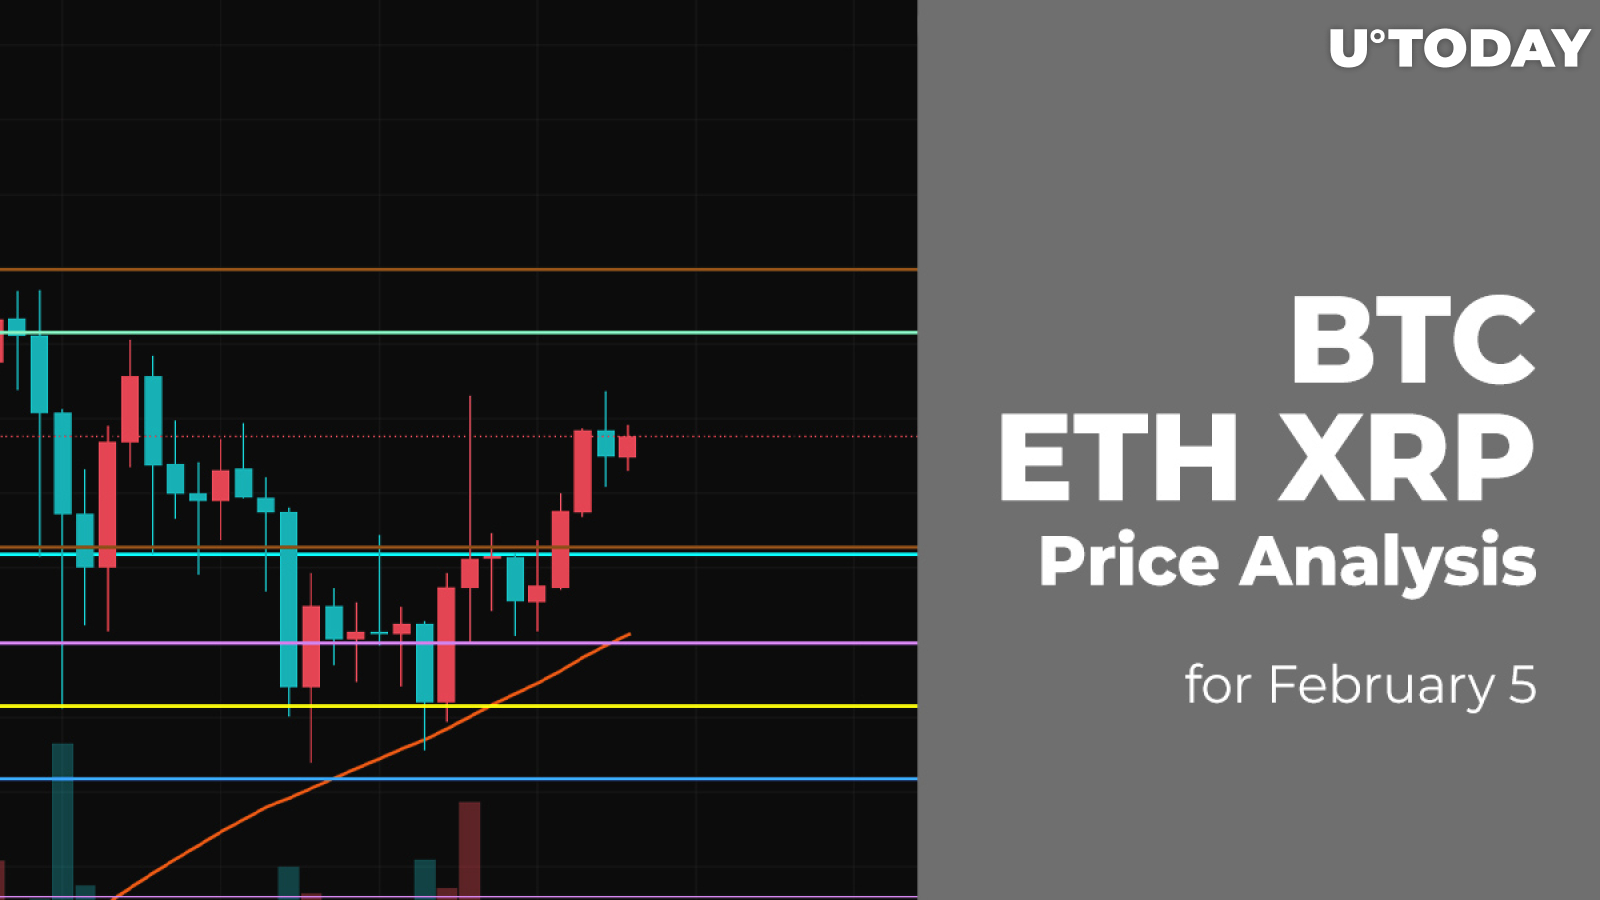 BTC, ETH and XRP Price Analysis for February 5